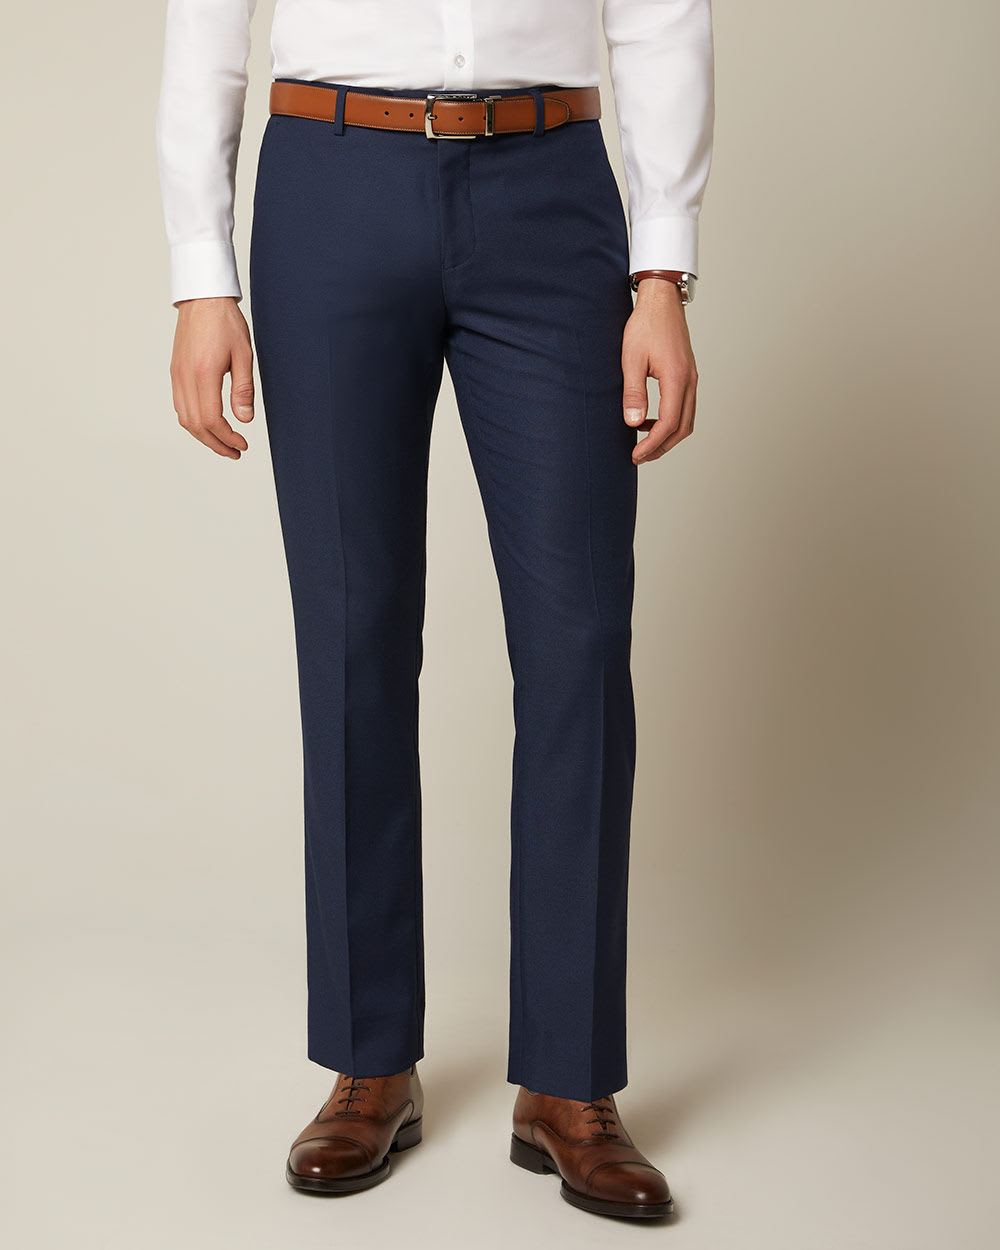 Essential Tailored Fit Navy Blue Suit Pant | RW&CO.